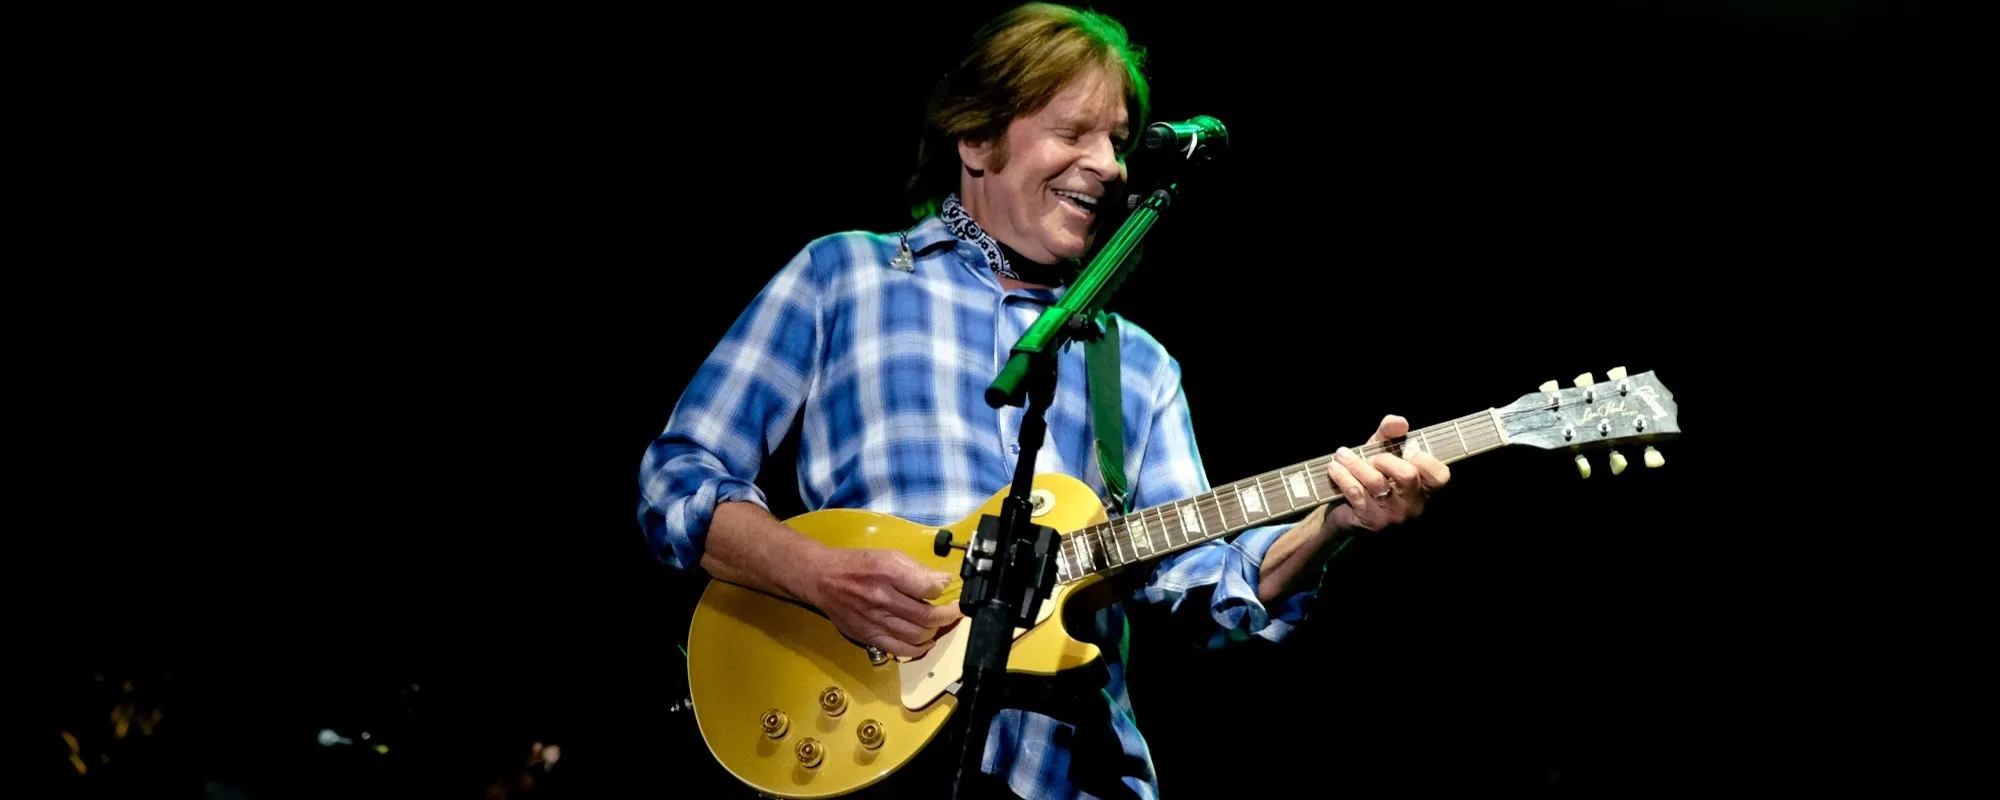 5 Fun Facts About John Fogerty’s Chart-Topping 1985 Solo Album, ‘Centerfield’